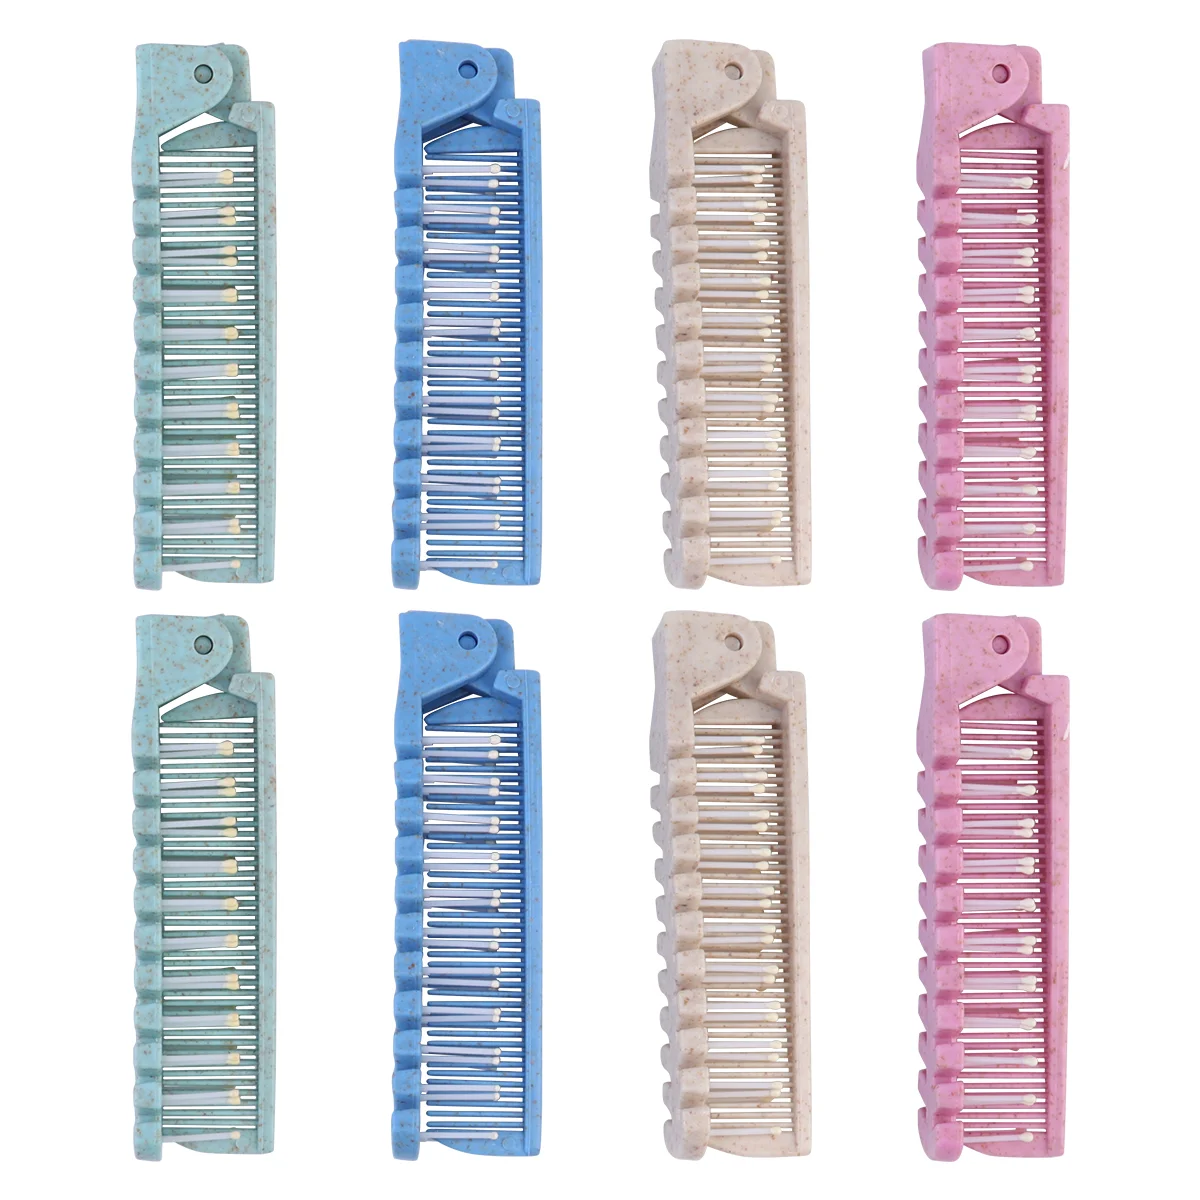 

8pcs Foldable Combs, Double Headed| Portable| Pocket| Anti- static Folding Combs for Hairdressing ( )